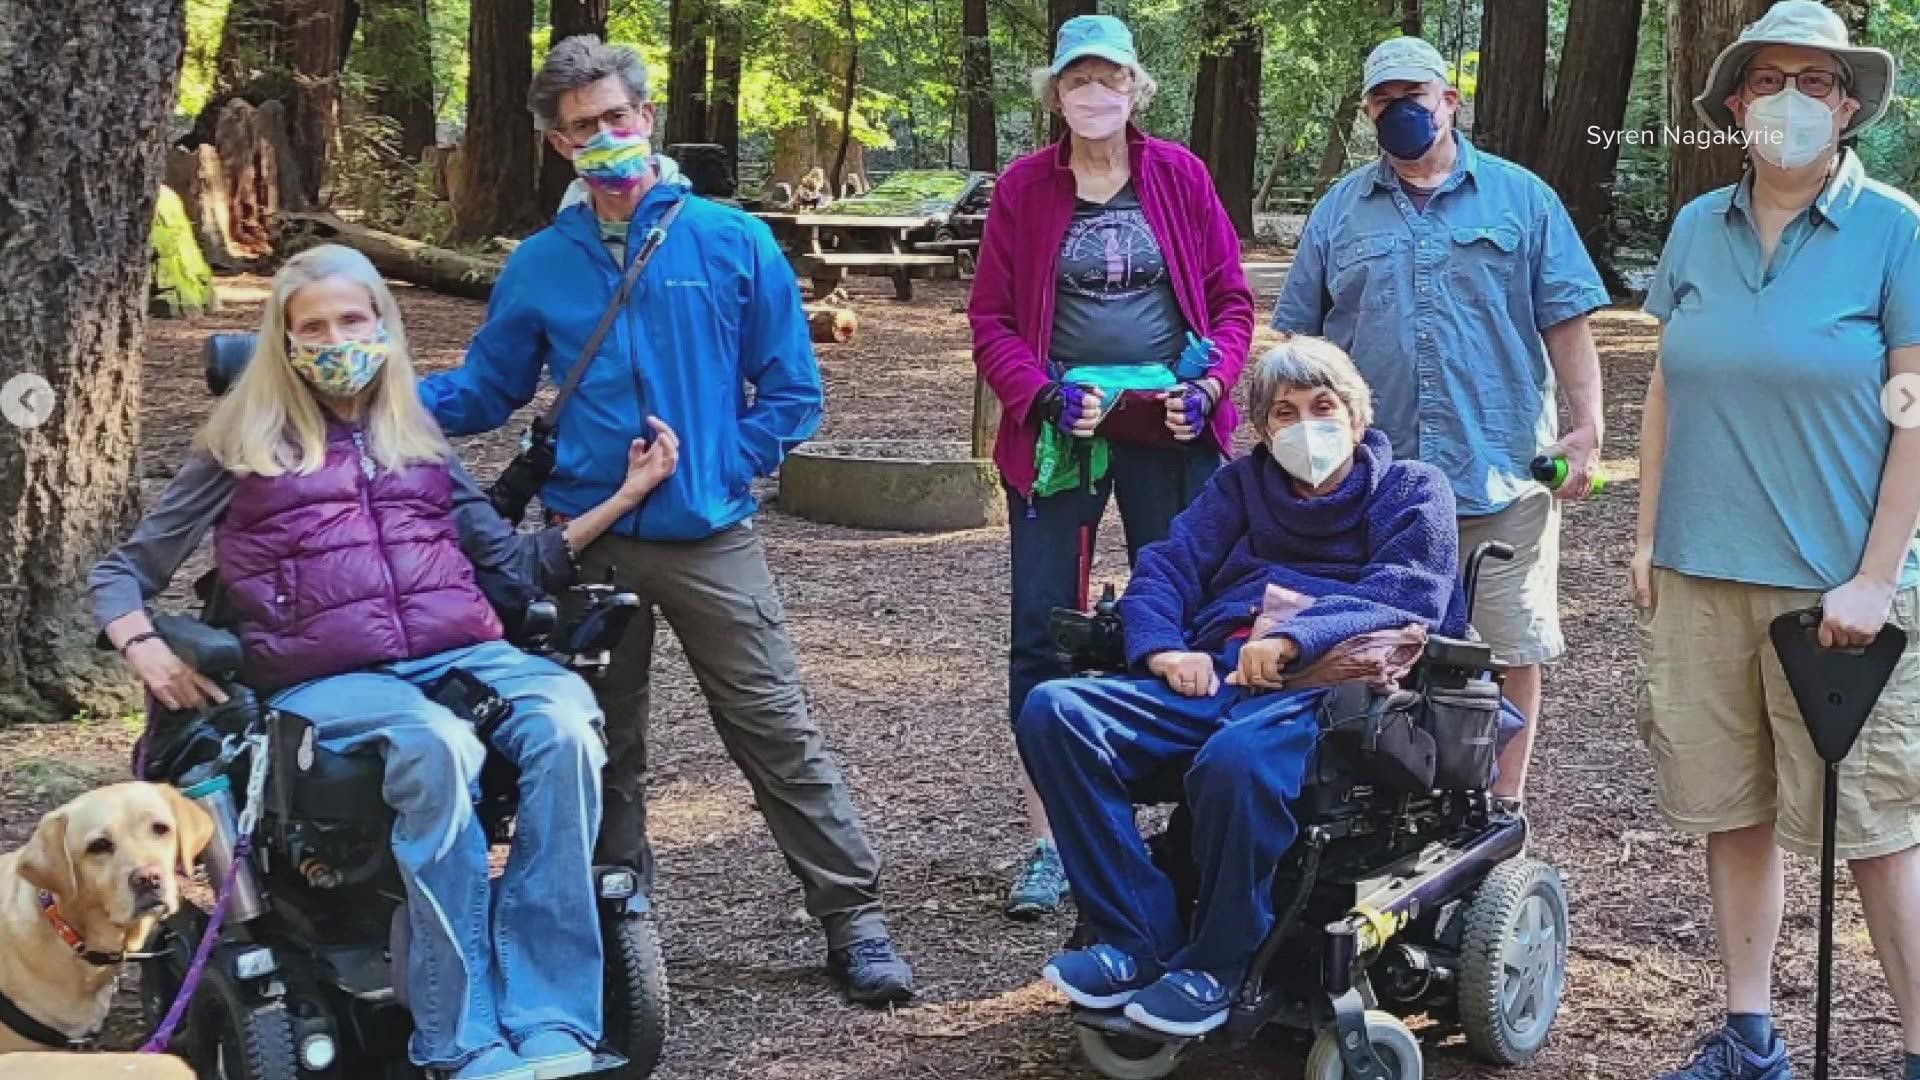 Syren Nagakyrie is the author of "The Disabled Hiker's Guide to Western Washington and Oregon."